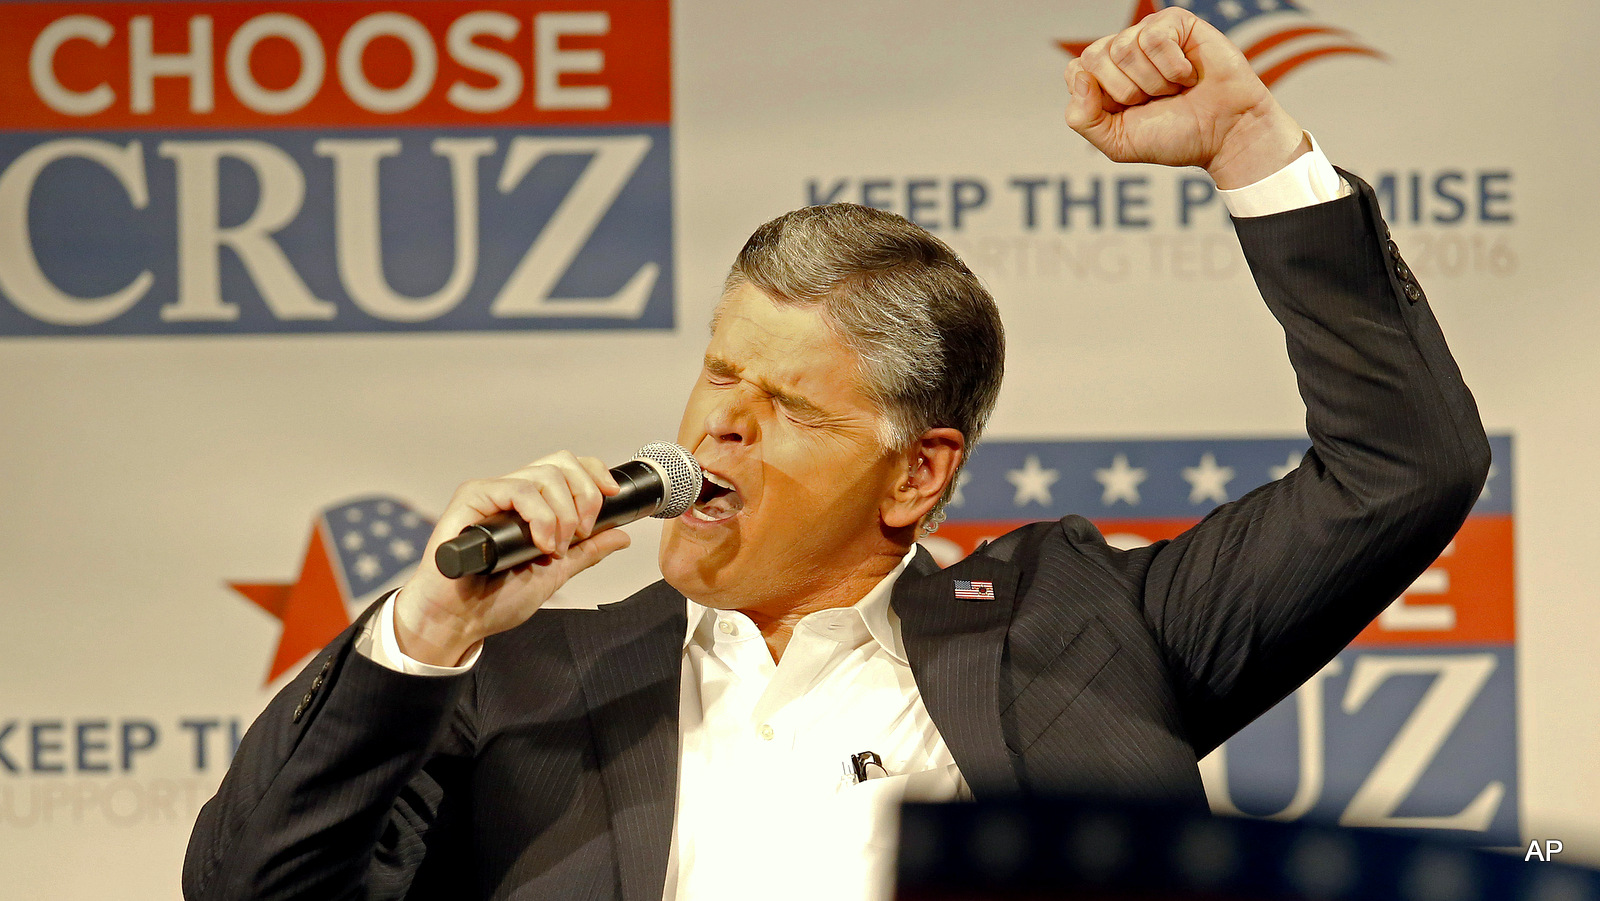 Fox news Channel's Sean Hannity campaigns on behalf of of Republican presidential candidate Ted Cruz.March 18, 2016, in Phoenix. 